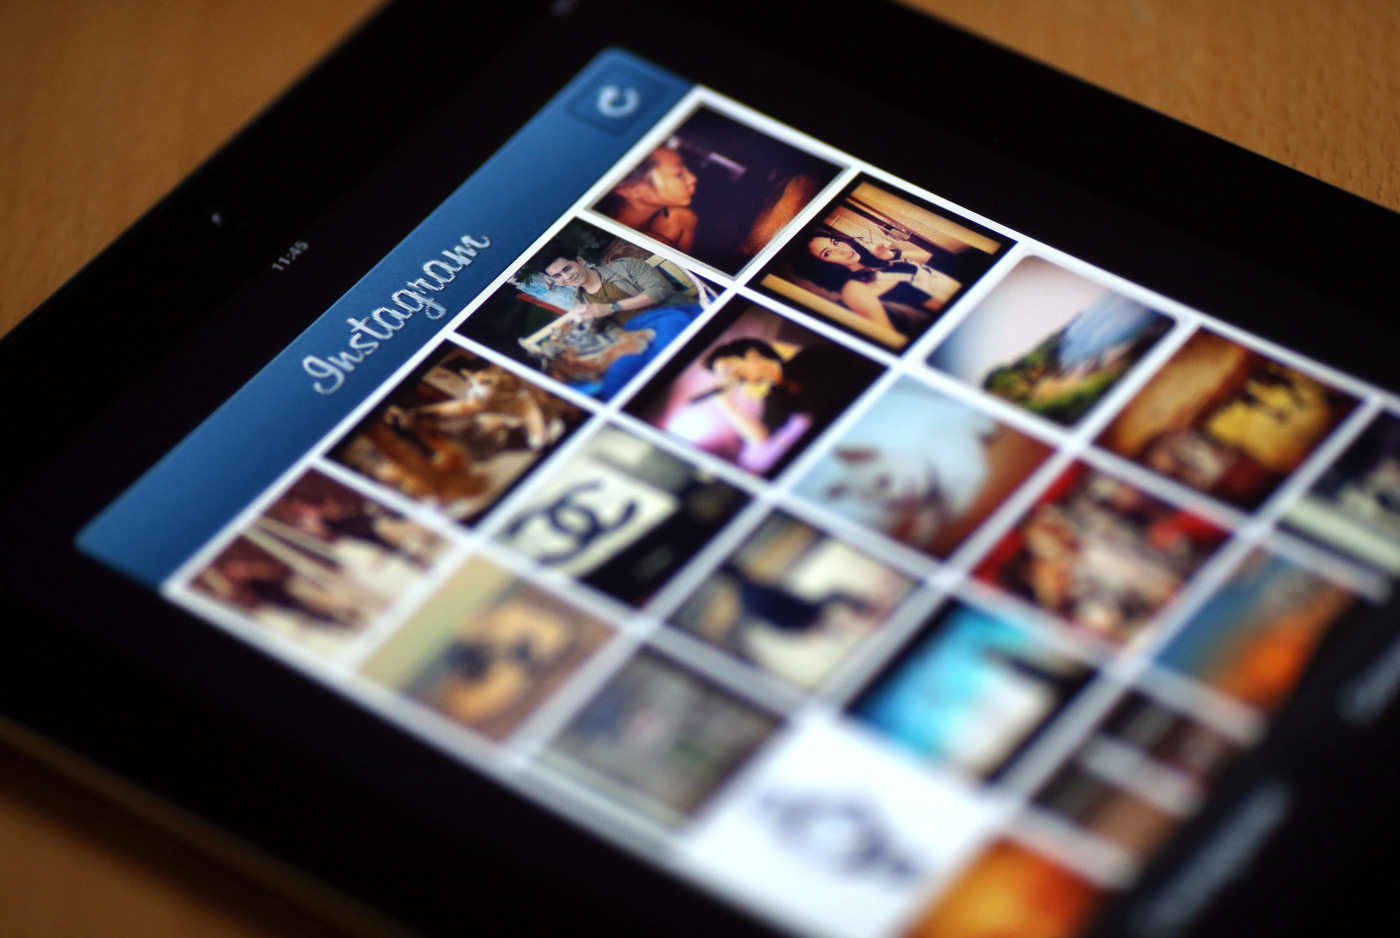 Pictures appear on the smartphone sharing application Instagram. (Thomas Coex&mdash;AFP/Getty Images)